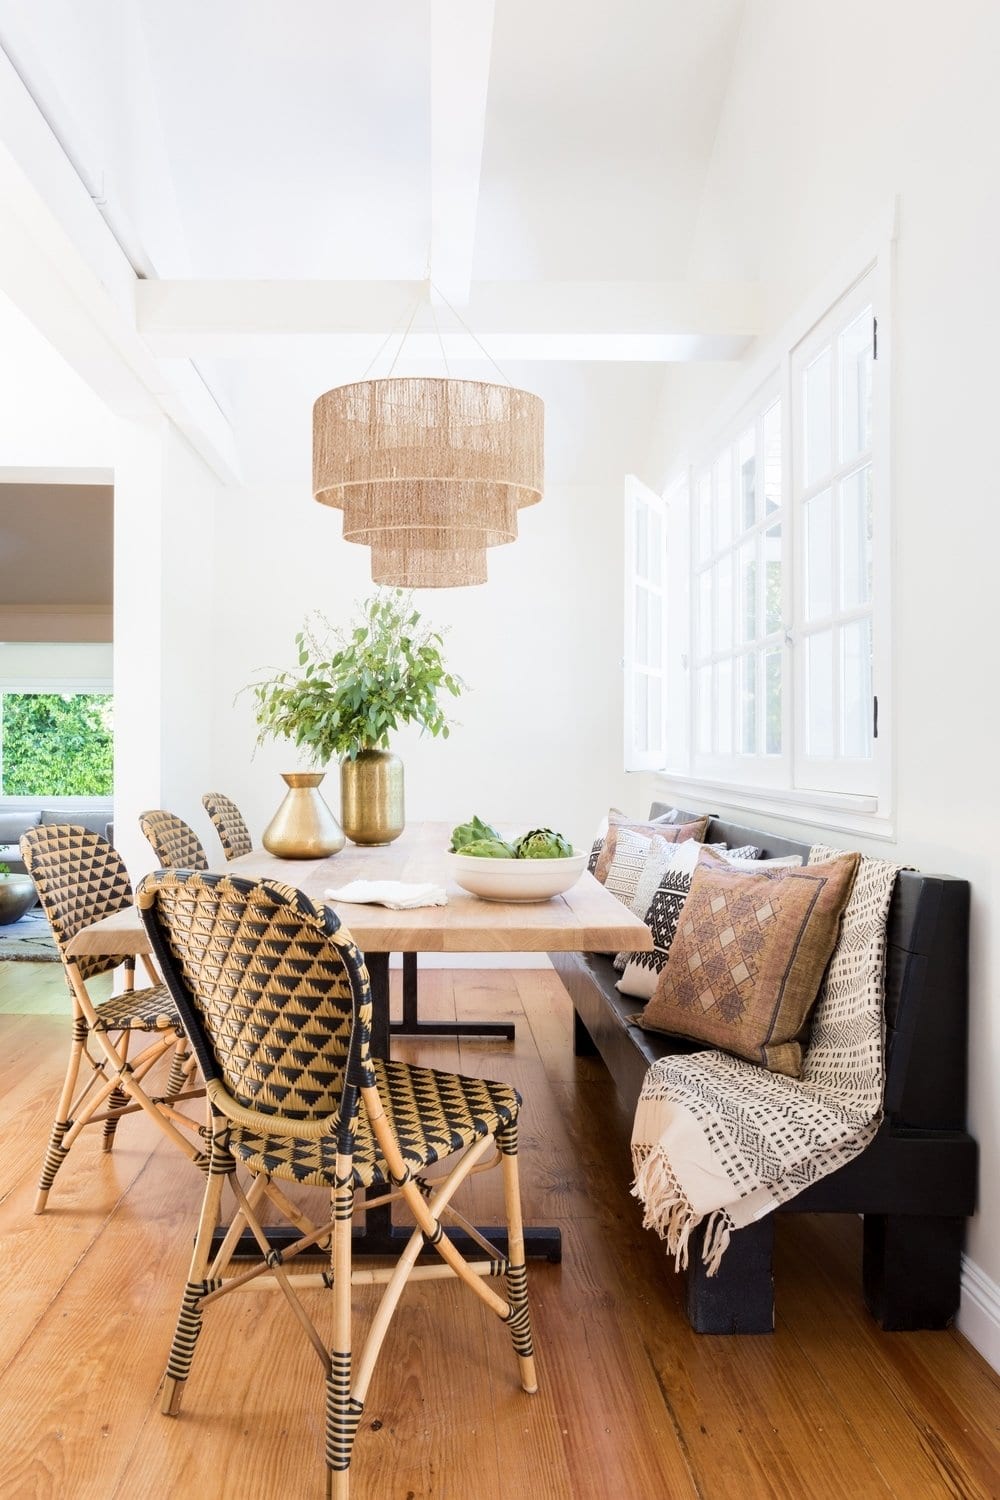 Make a Statement with a Jute Chandelier